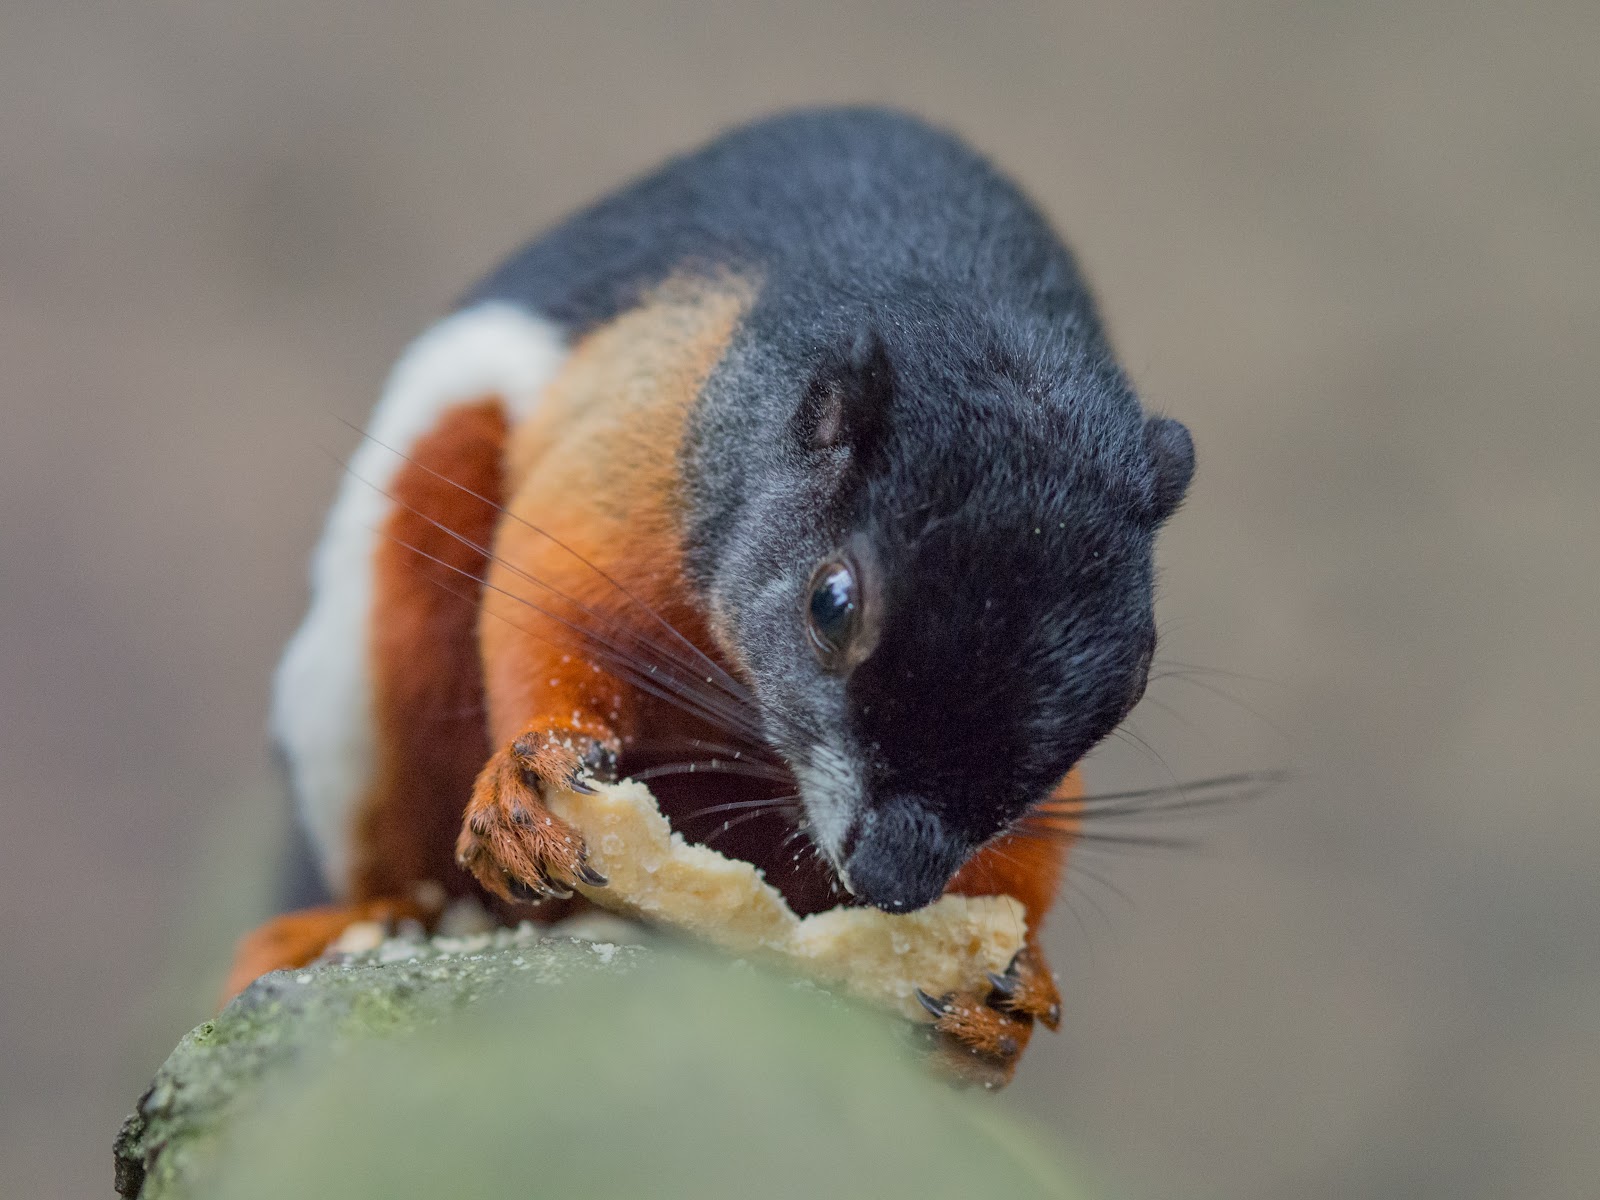 Black rodent with red belly eating a chip